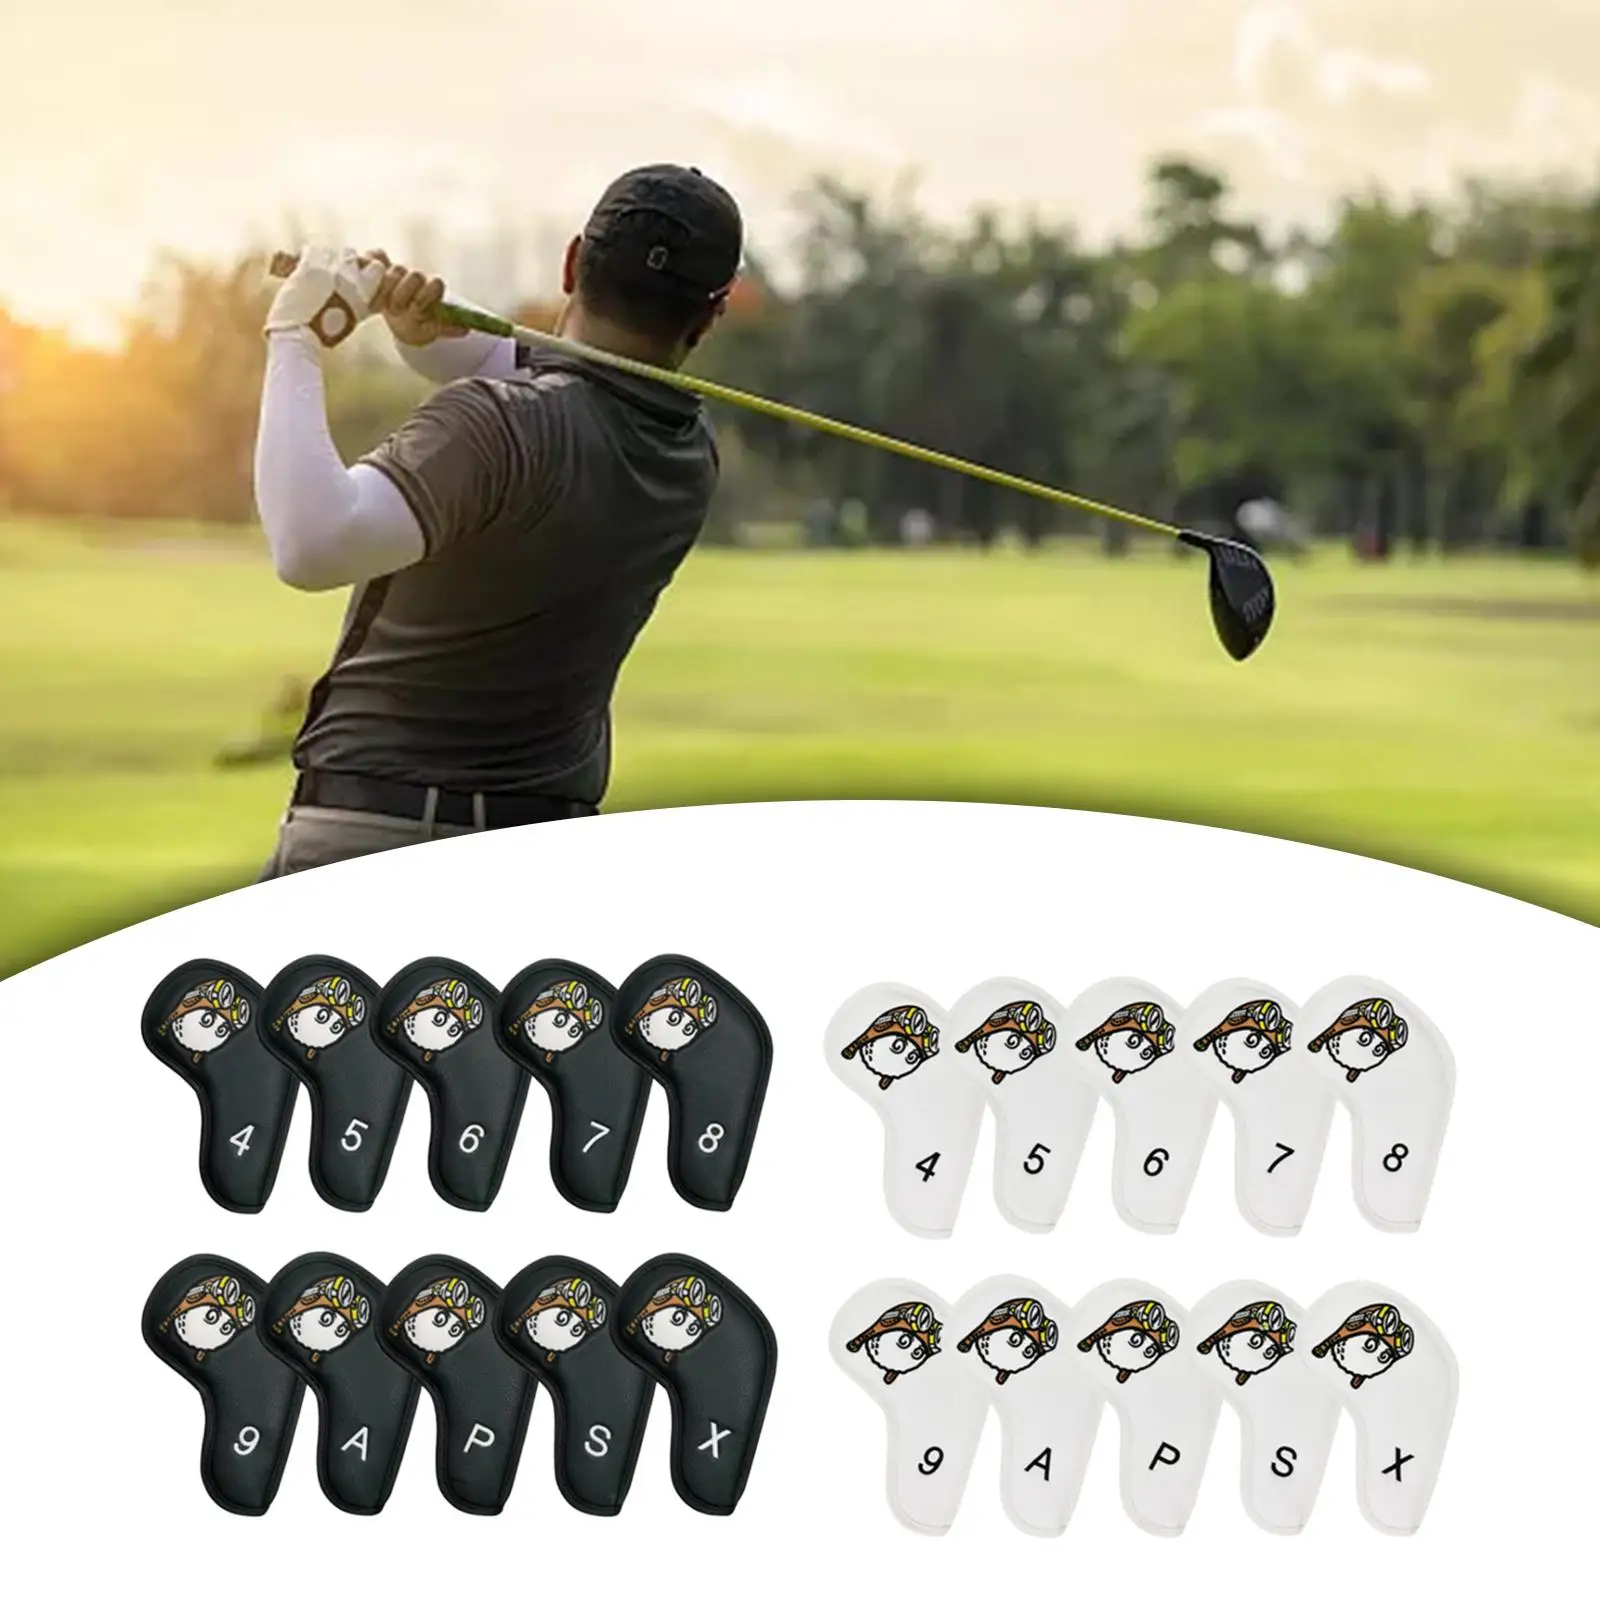 10 Pieces Golf Iron Head Covers Pilots Pattern 4-9,A P,S,x golfs Iron Headcover PU Leather Water Resistant Men Women Protector